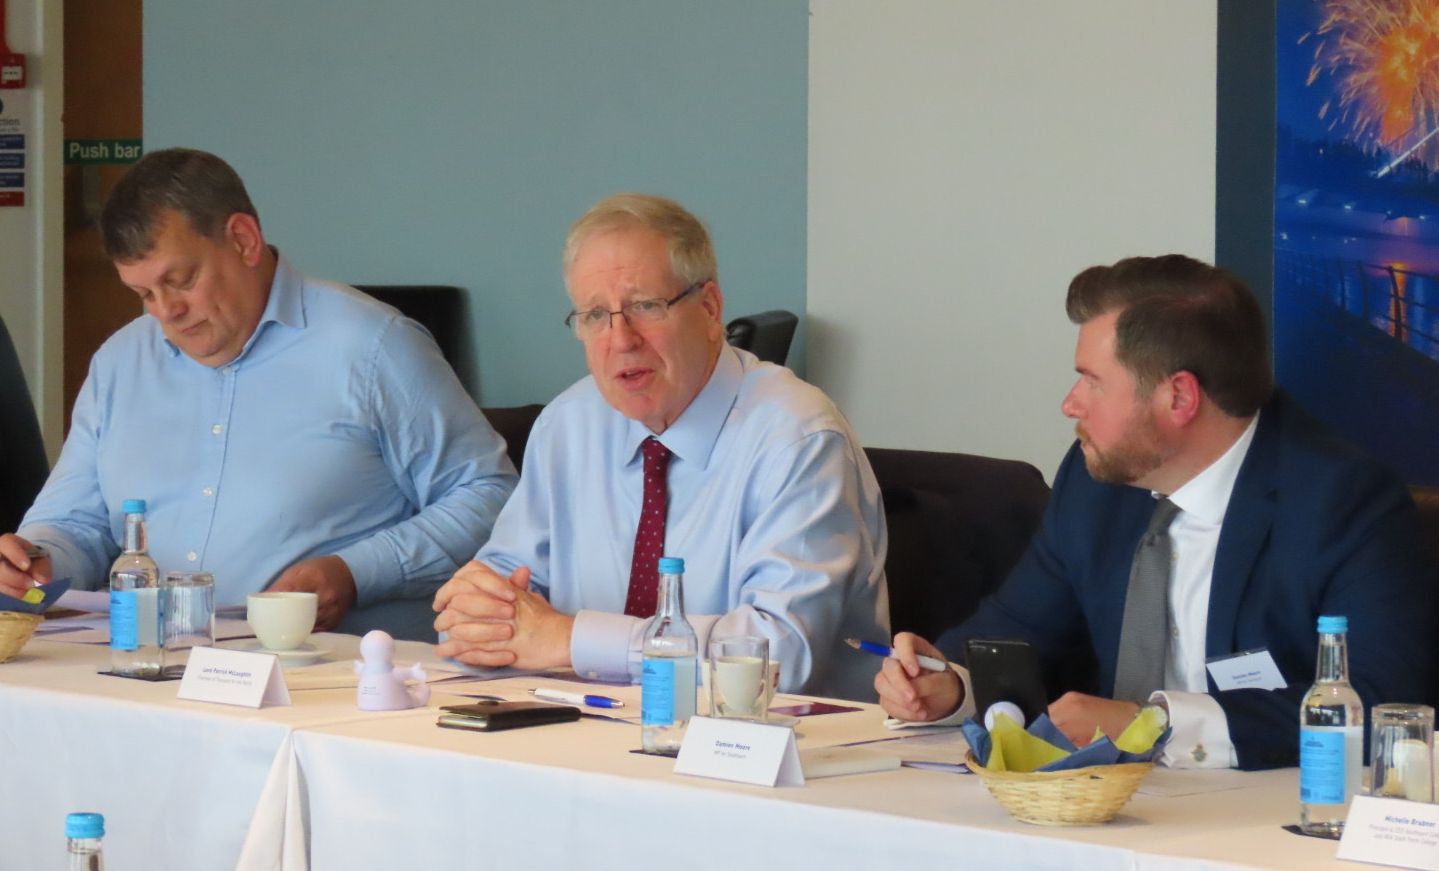 Martin Tugwell, CEO of Transport for the North (left); Patrick McLoughlin, Chairman of Transport for the North (centre); and Southport MP Damien Moore (right). Photo by Andrew Brown Media